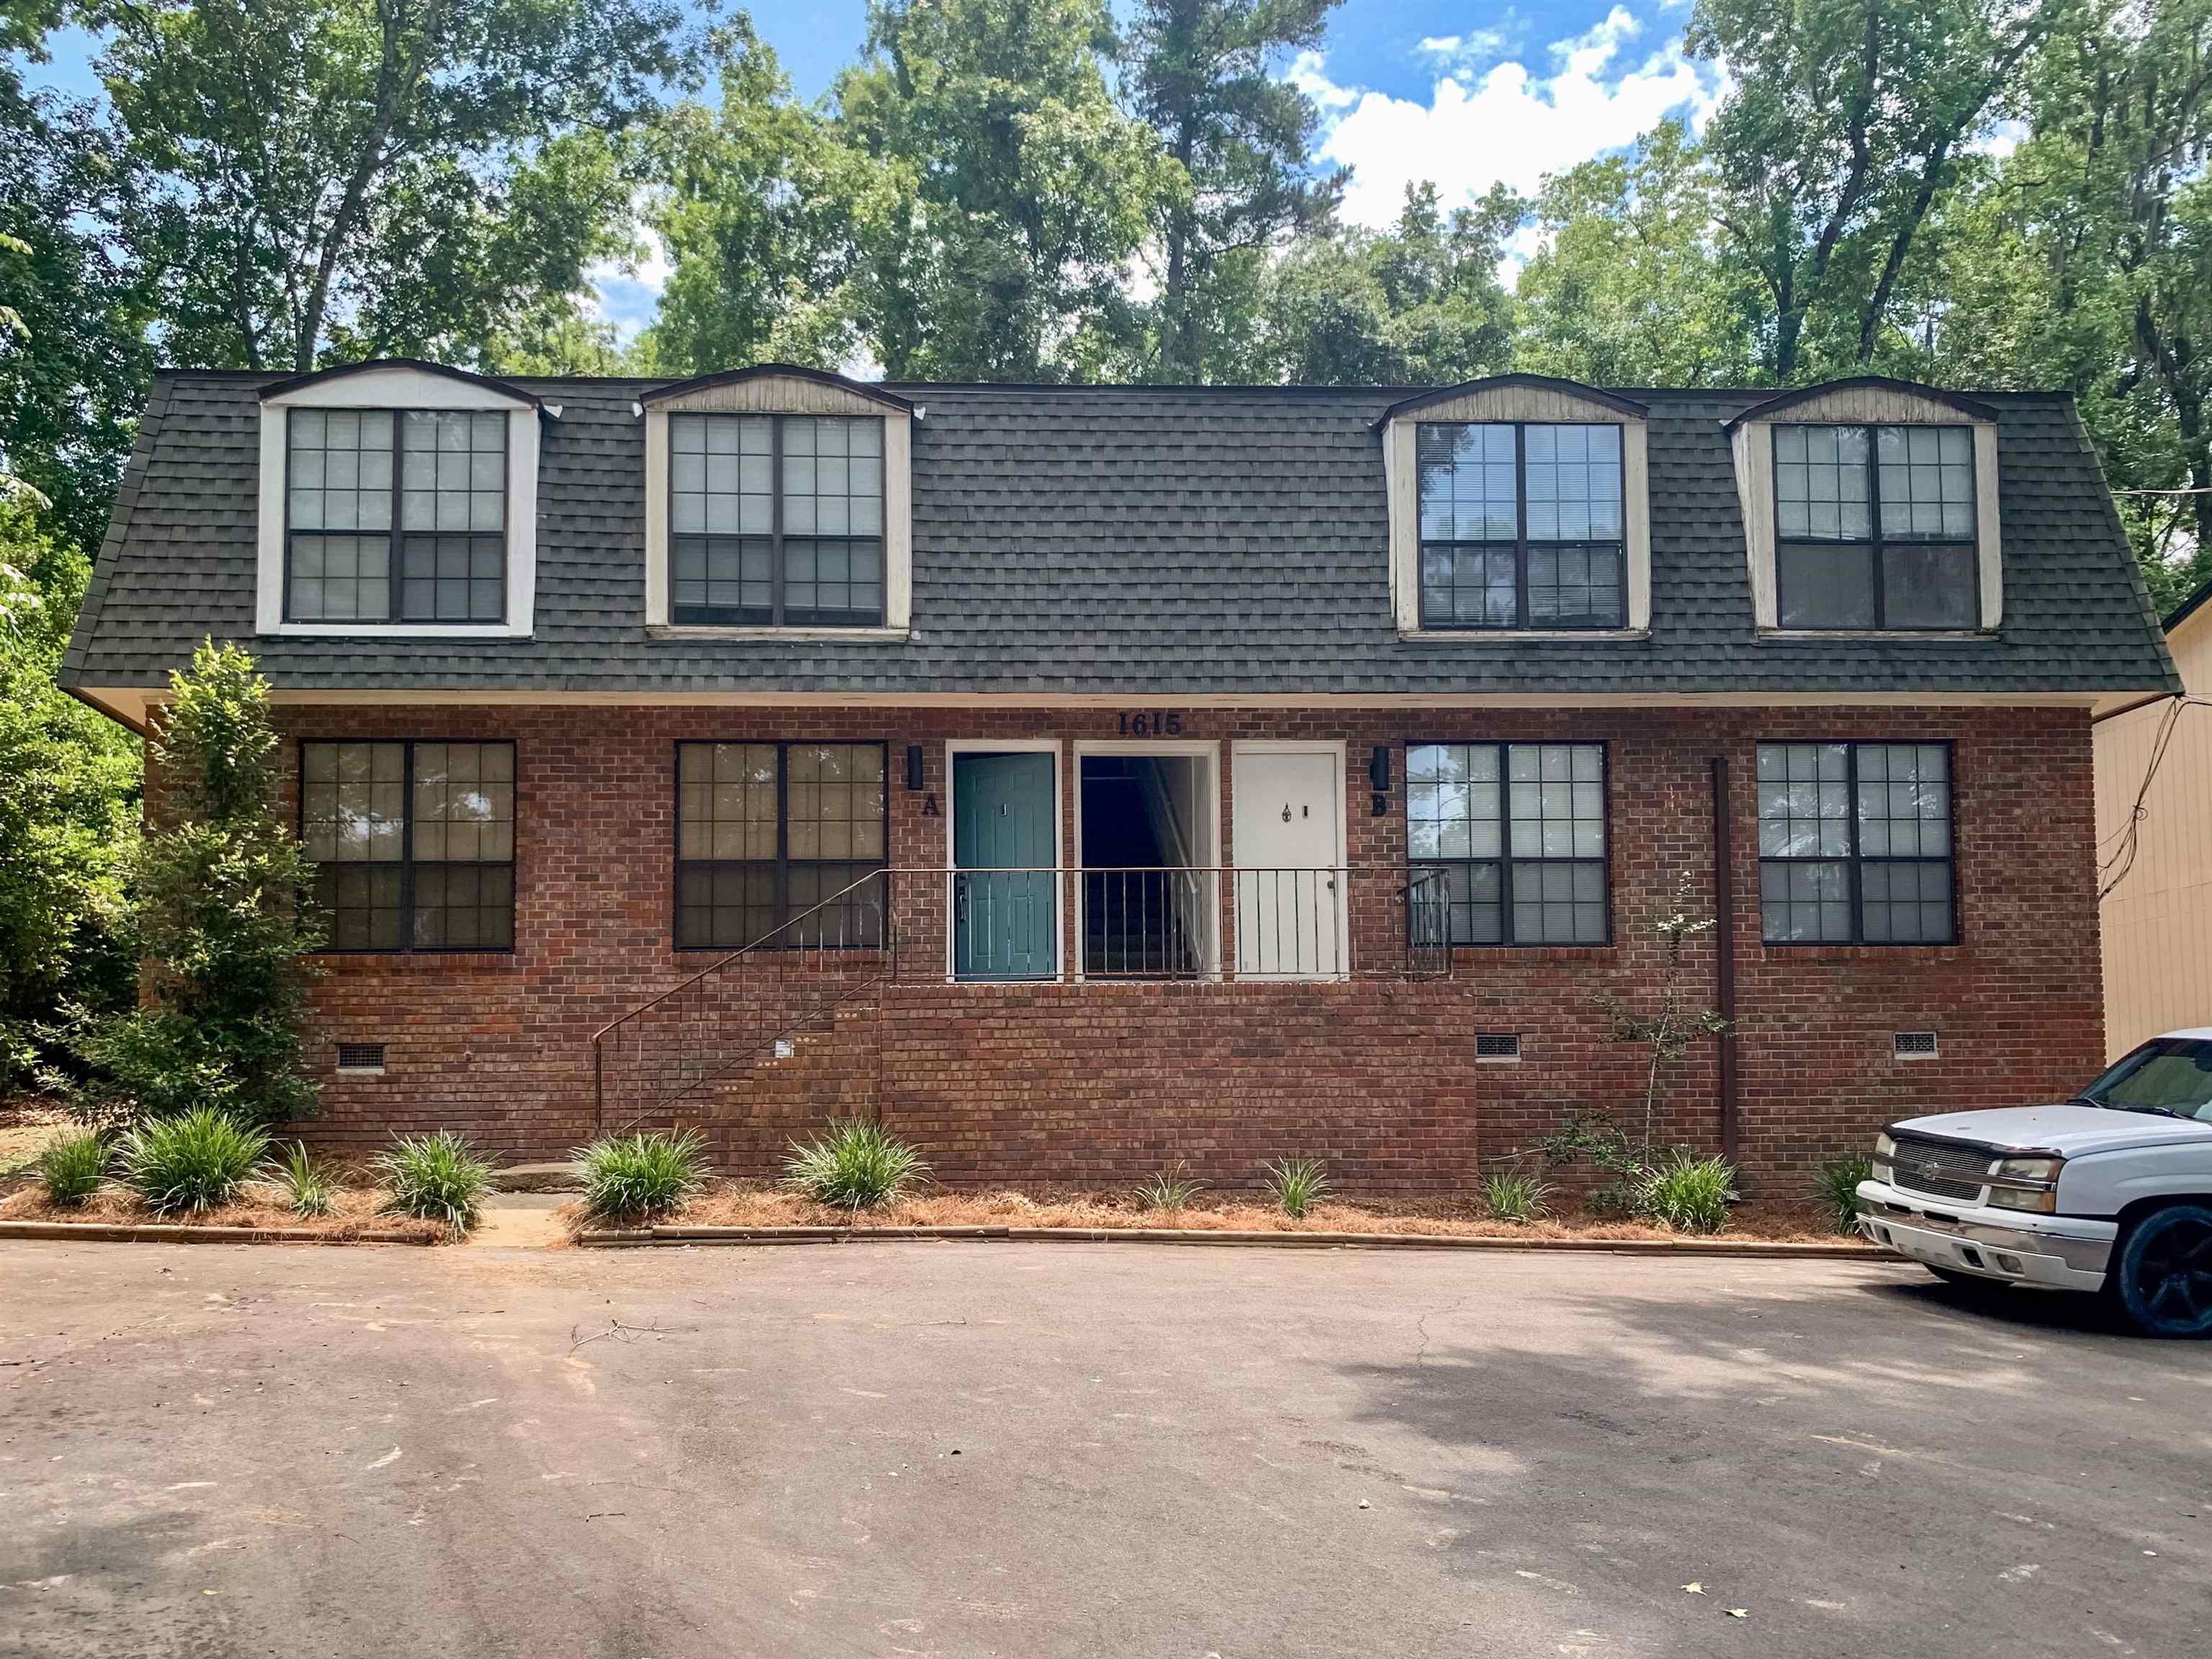 Well maintained all brick quadruplex conveniently located off of Blairstone Rd. Each unit has 2 bedrooms, 2 baths, kitchen, pantry, inside laundry room, covered porch/balconies, and large living area. Unit A fully renovated with 2020 Hvac and 2020 water heater. Unit B 2021 Hvac and 2019 water heater. Unit C fully renovated with 2020 Hvac and 2014 water heater. Unit D recently updated with 2021 Hvac and 2017 water heater. Updated plumbing and electrical in all units. 2020 roof. Repaved large parking lot. No Restrictive Covenants or HOA. Great cash flow opportunity. Very low maintenance. Stays rented.